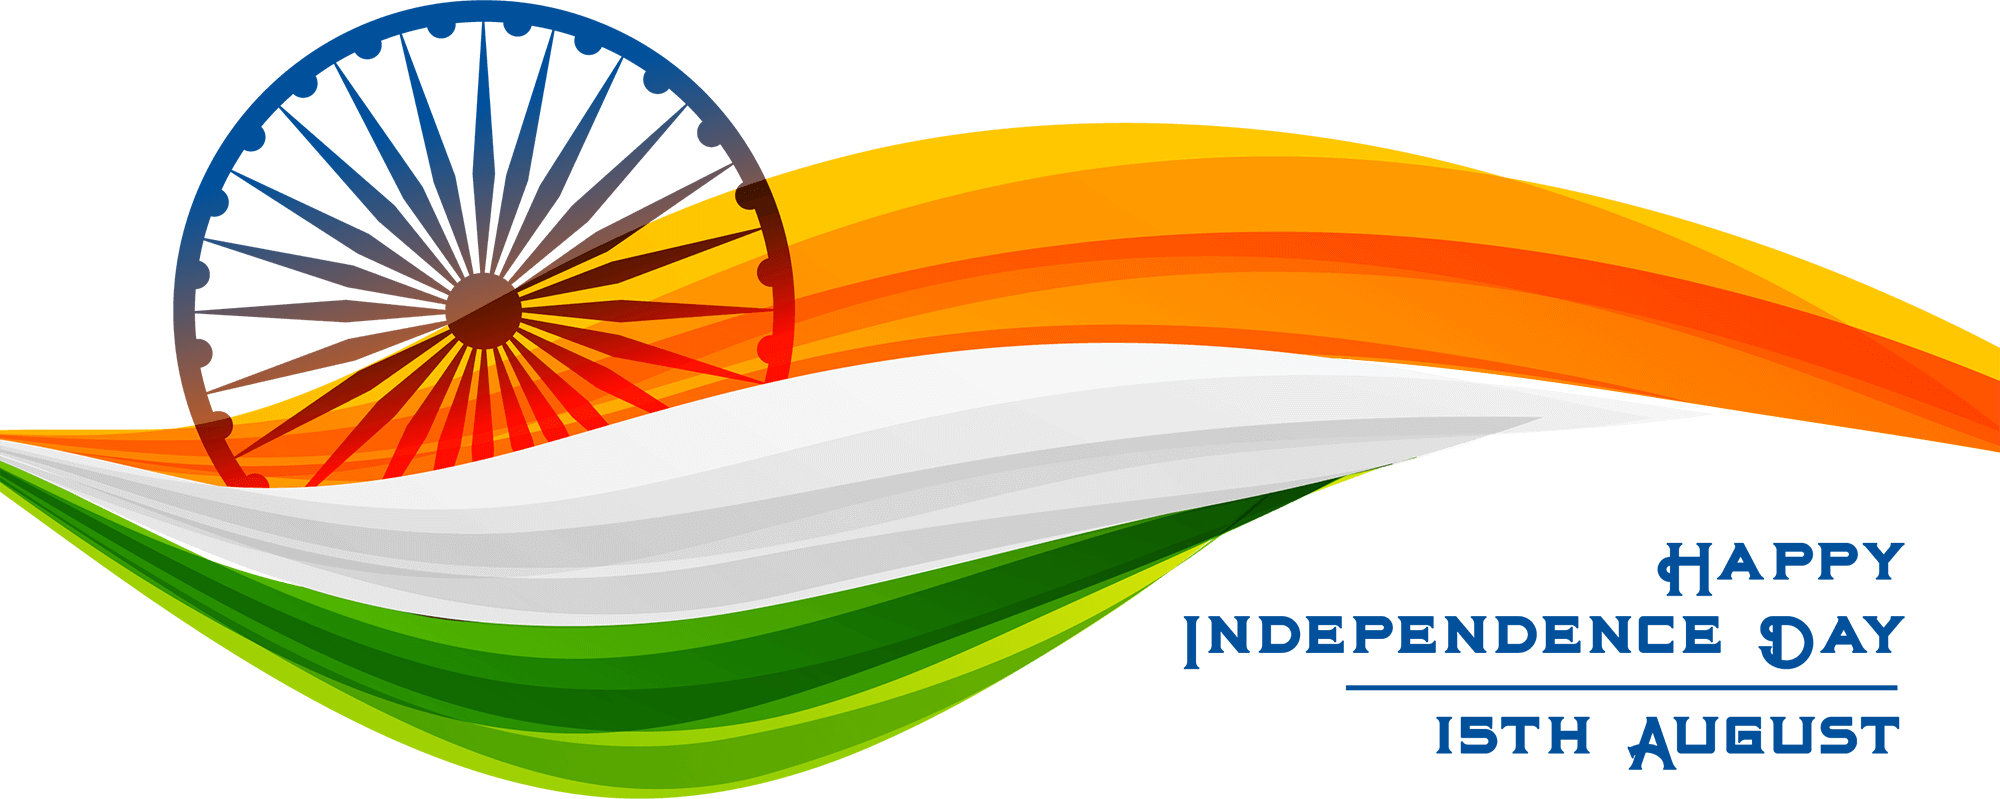 75th Independence Day Clipart Happy India Independence Day PNG